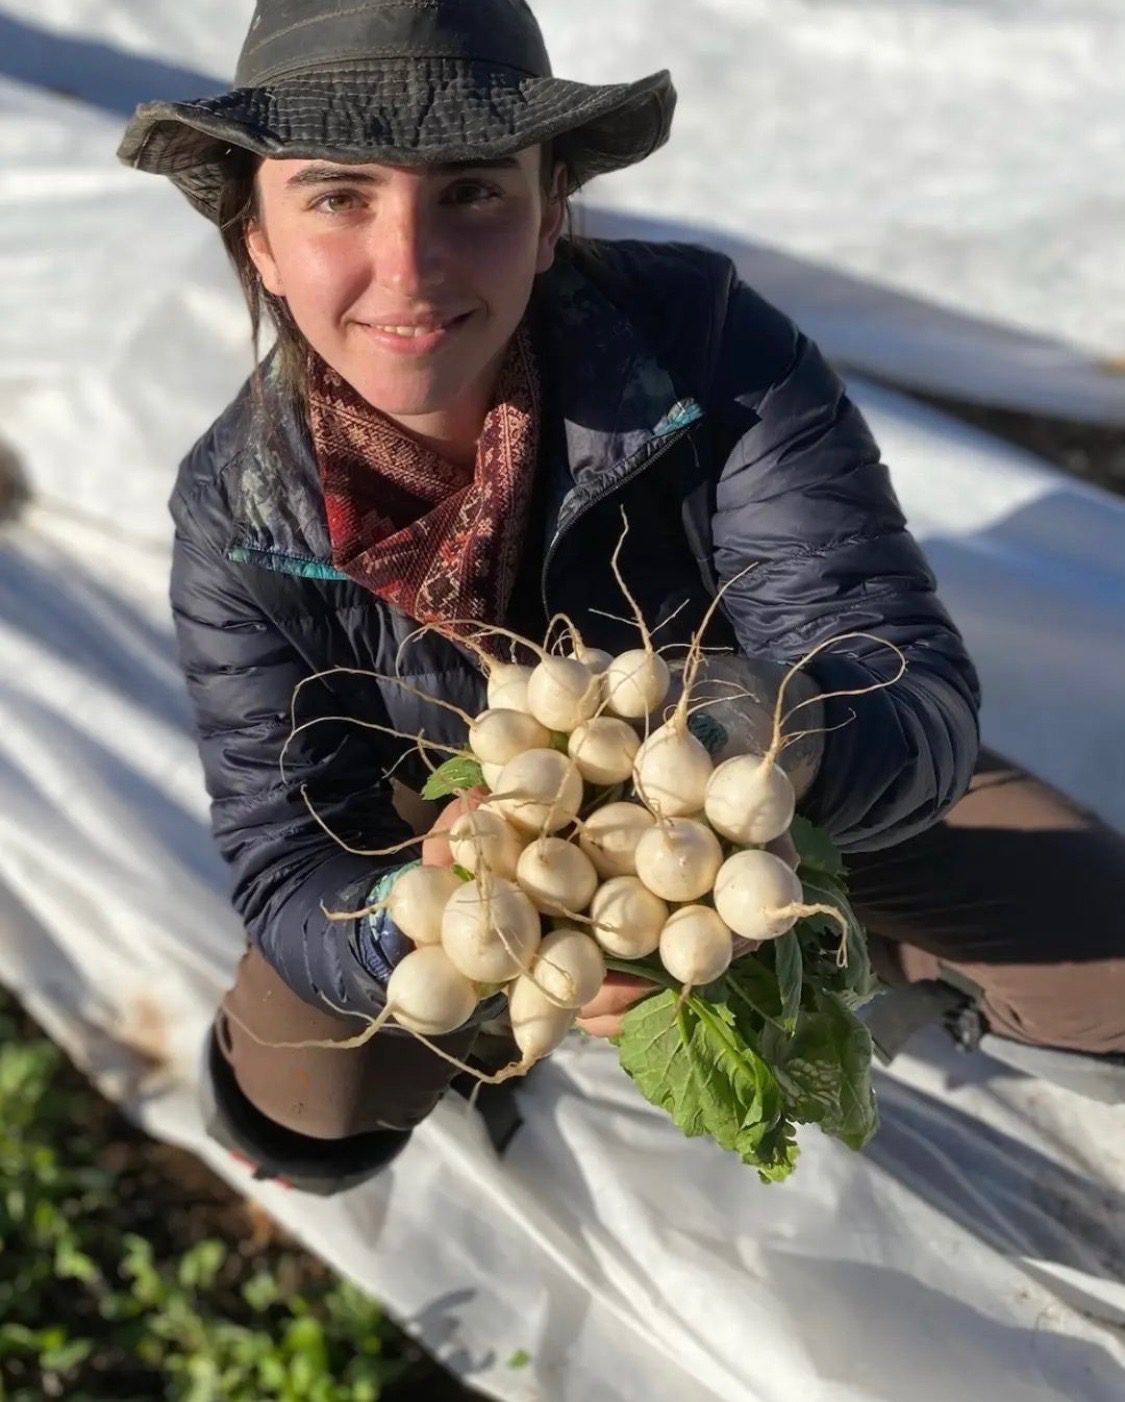 Savannah, owner of Encompass Farms in Asheville, holding local produce